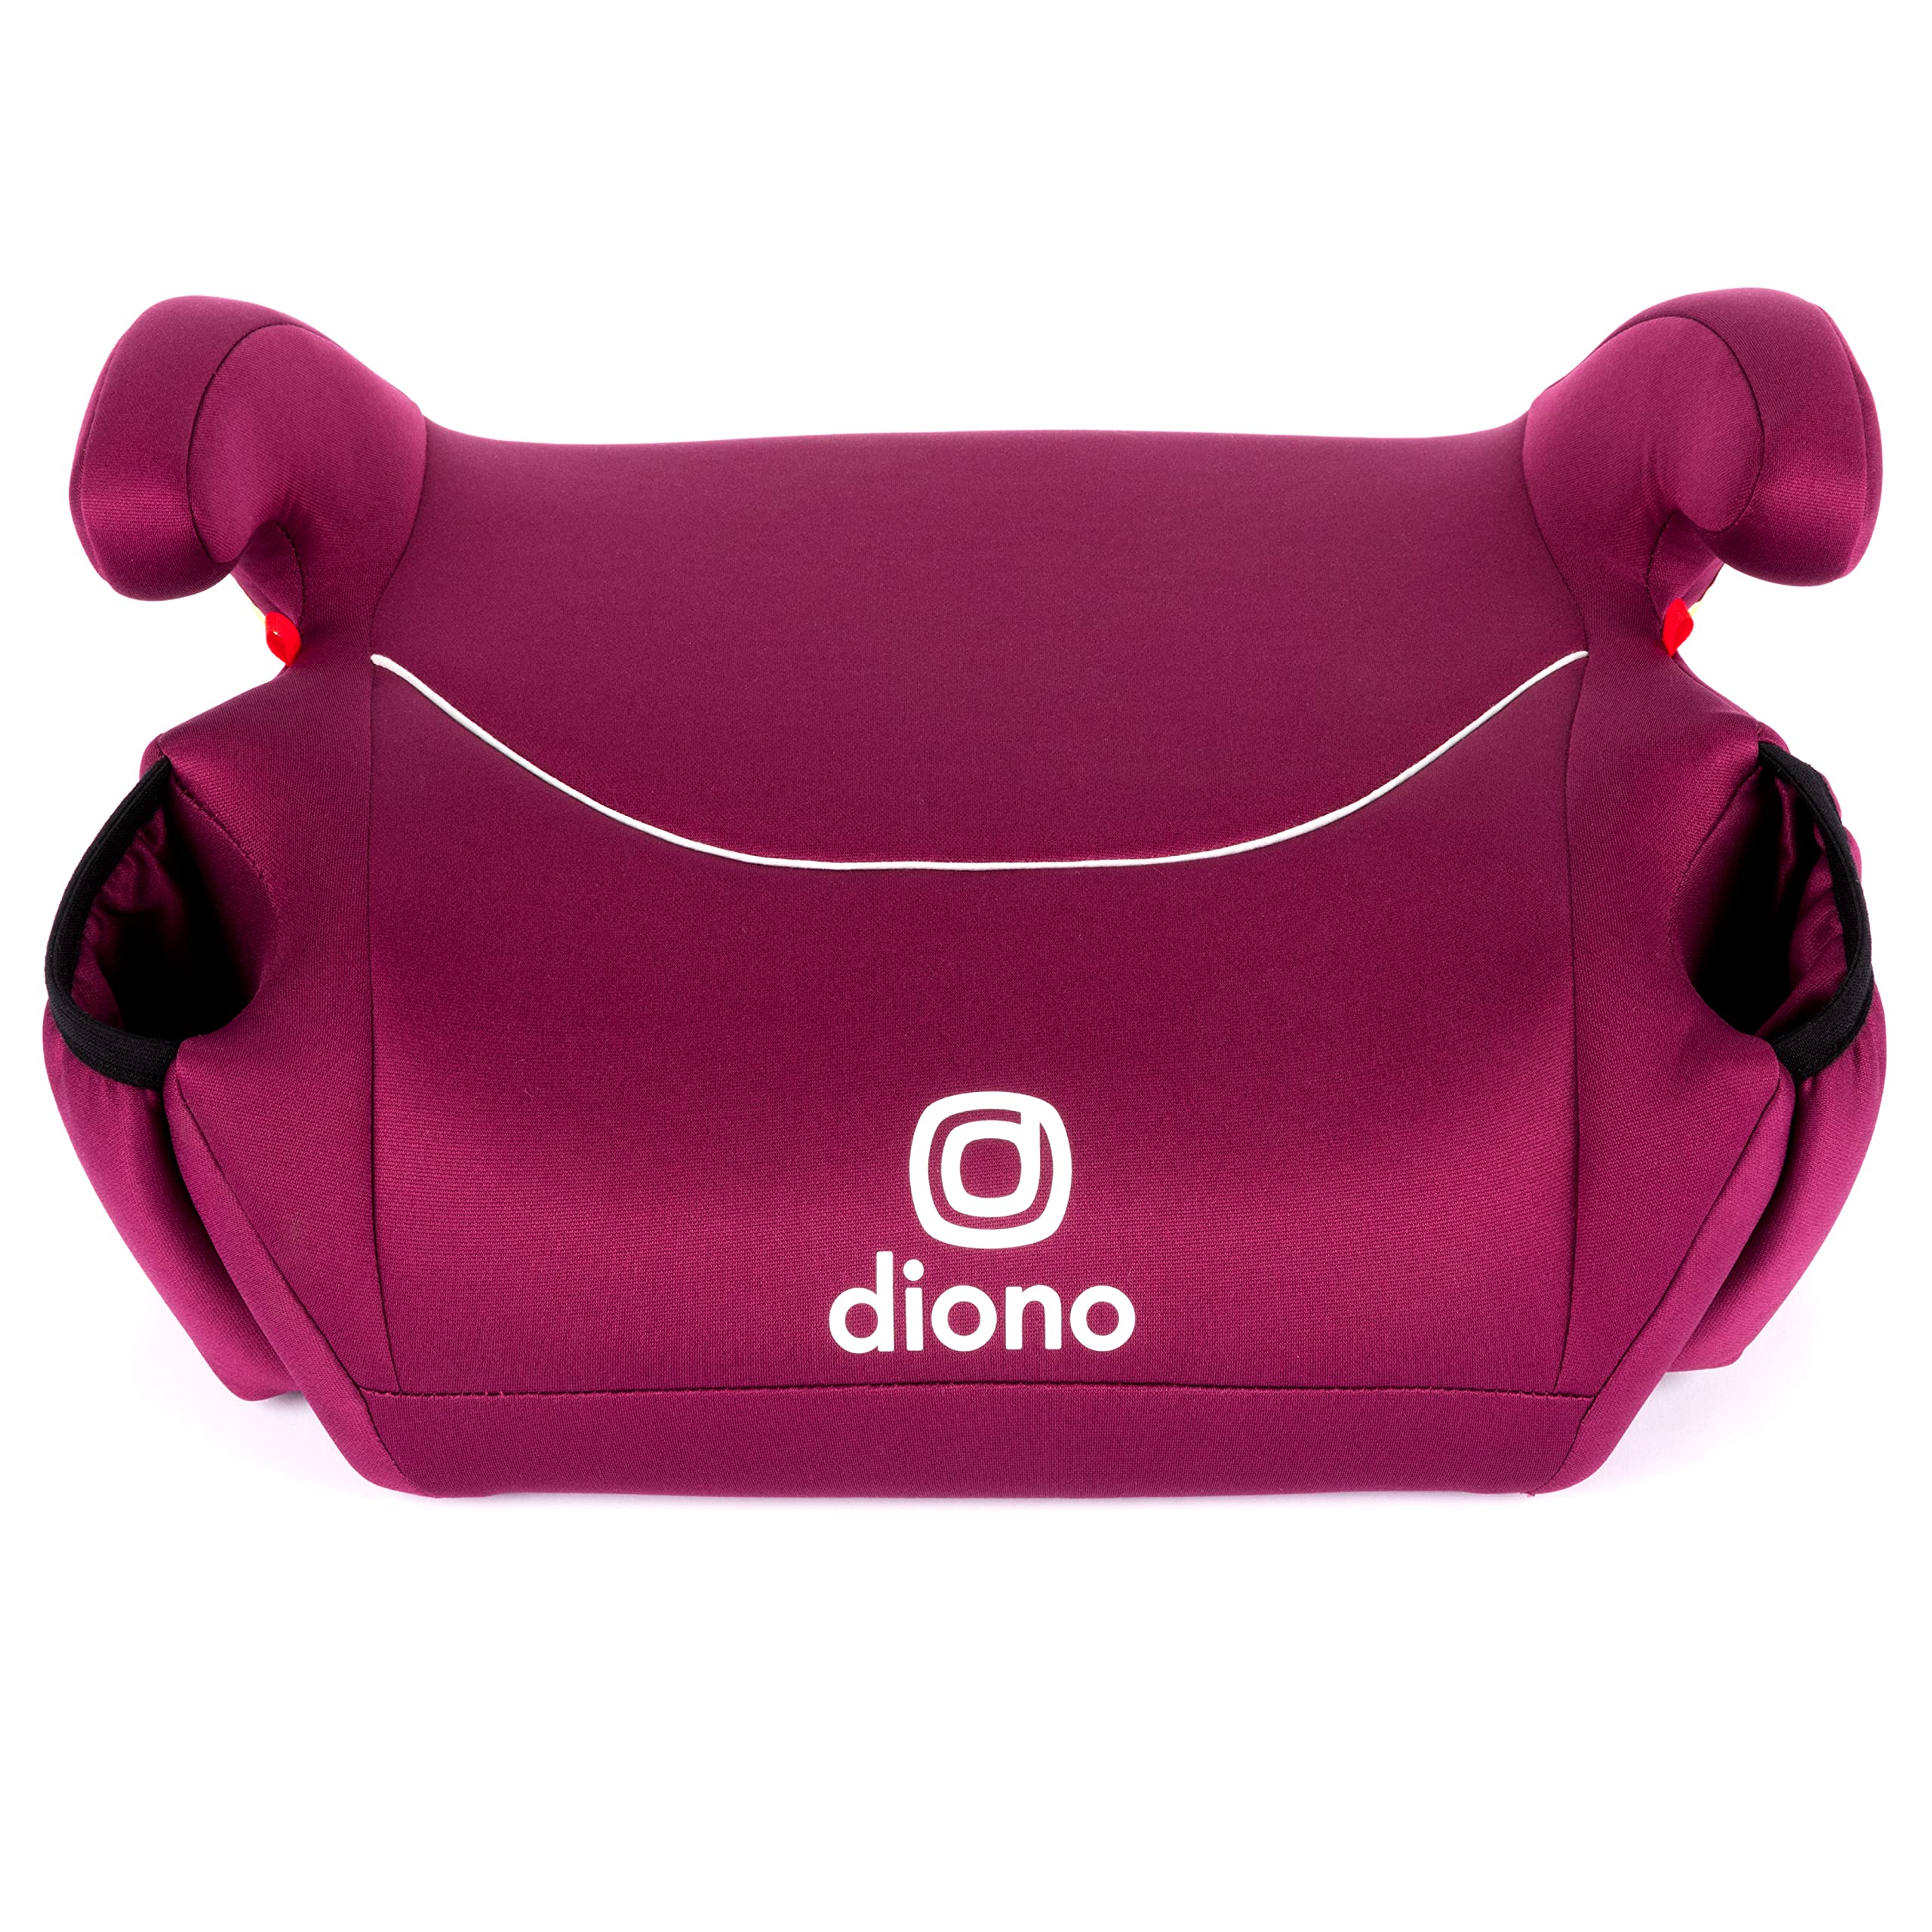 Diono Solana, No Latch, Single Backless Booster Car Seat, Lightweight, Machine Washable Covers, Cup Holders, Pink